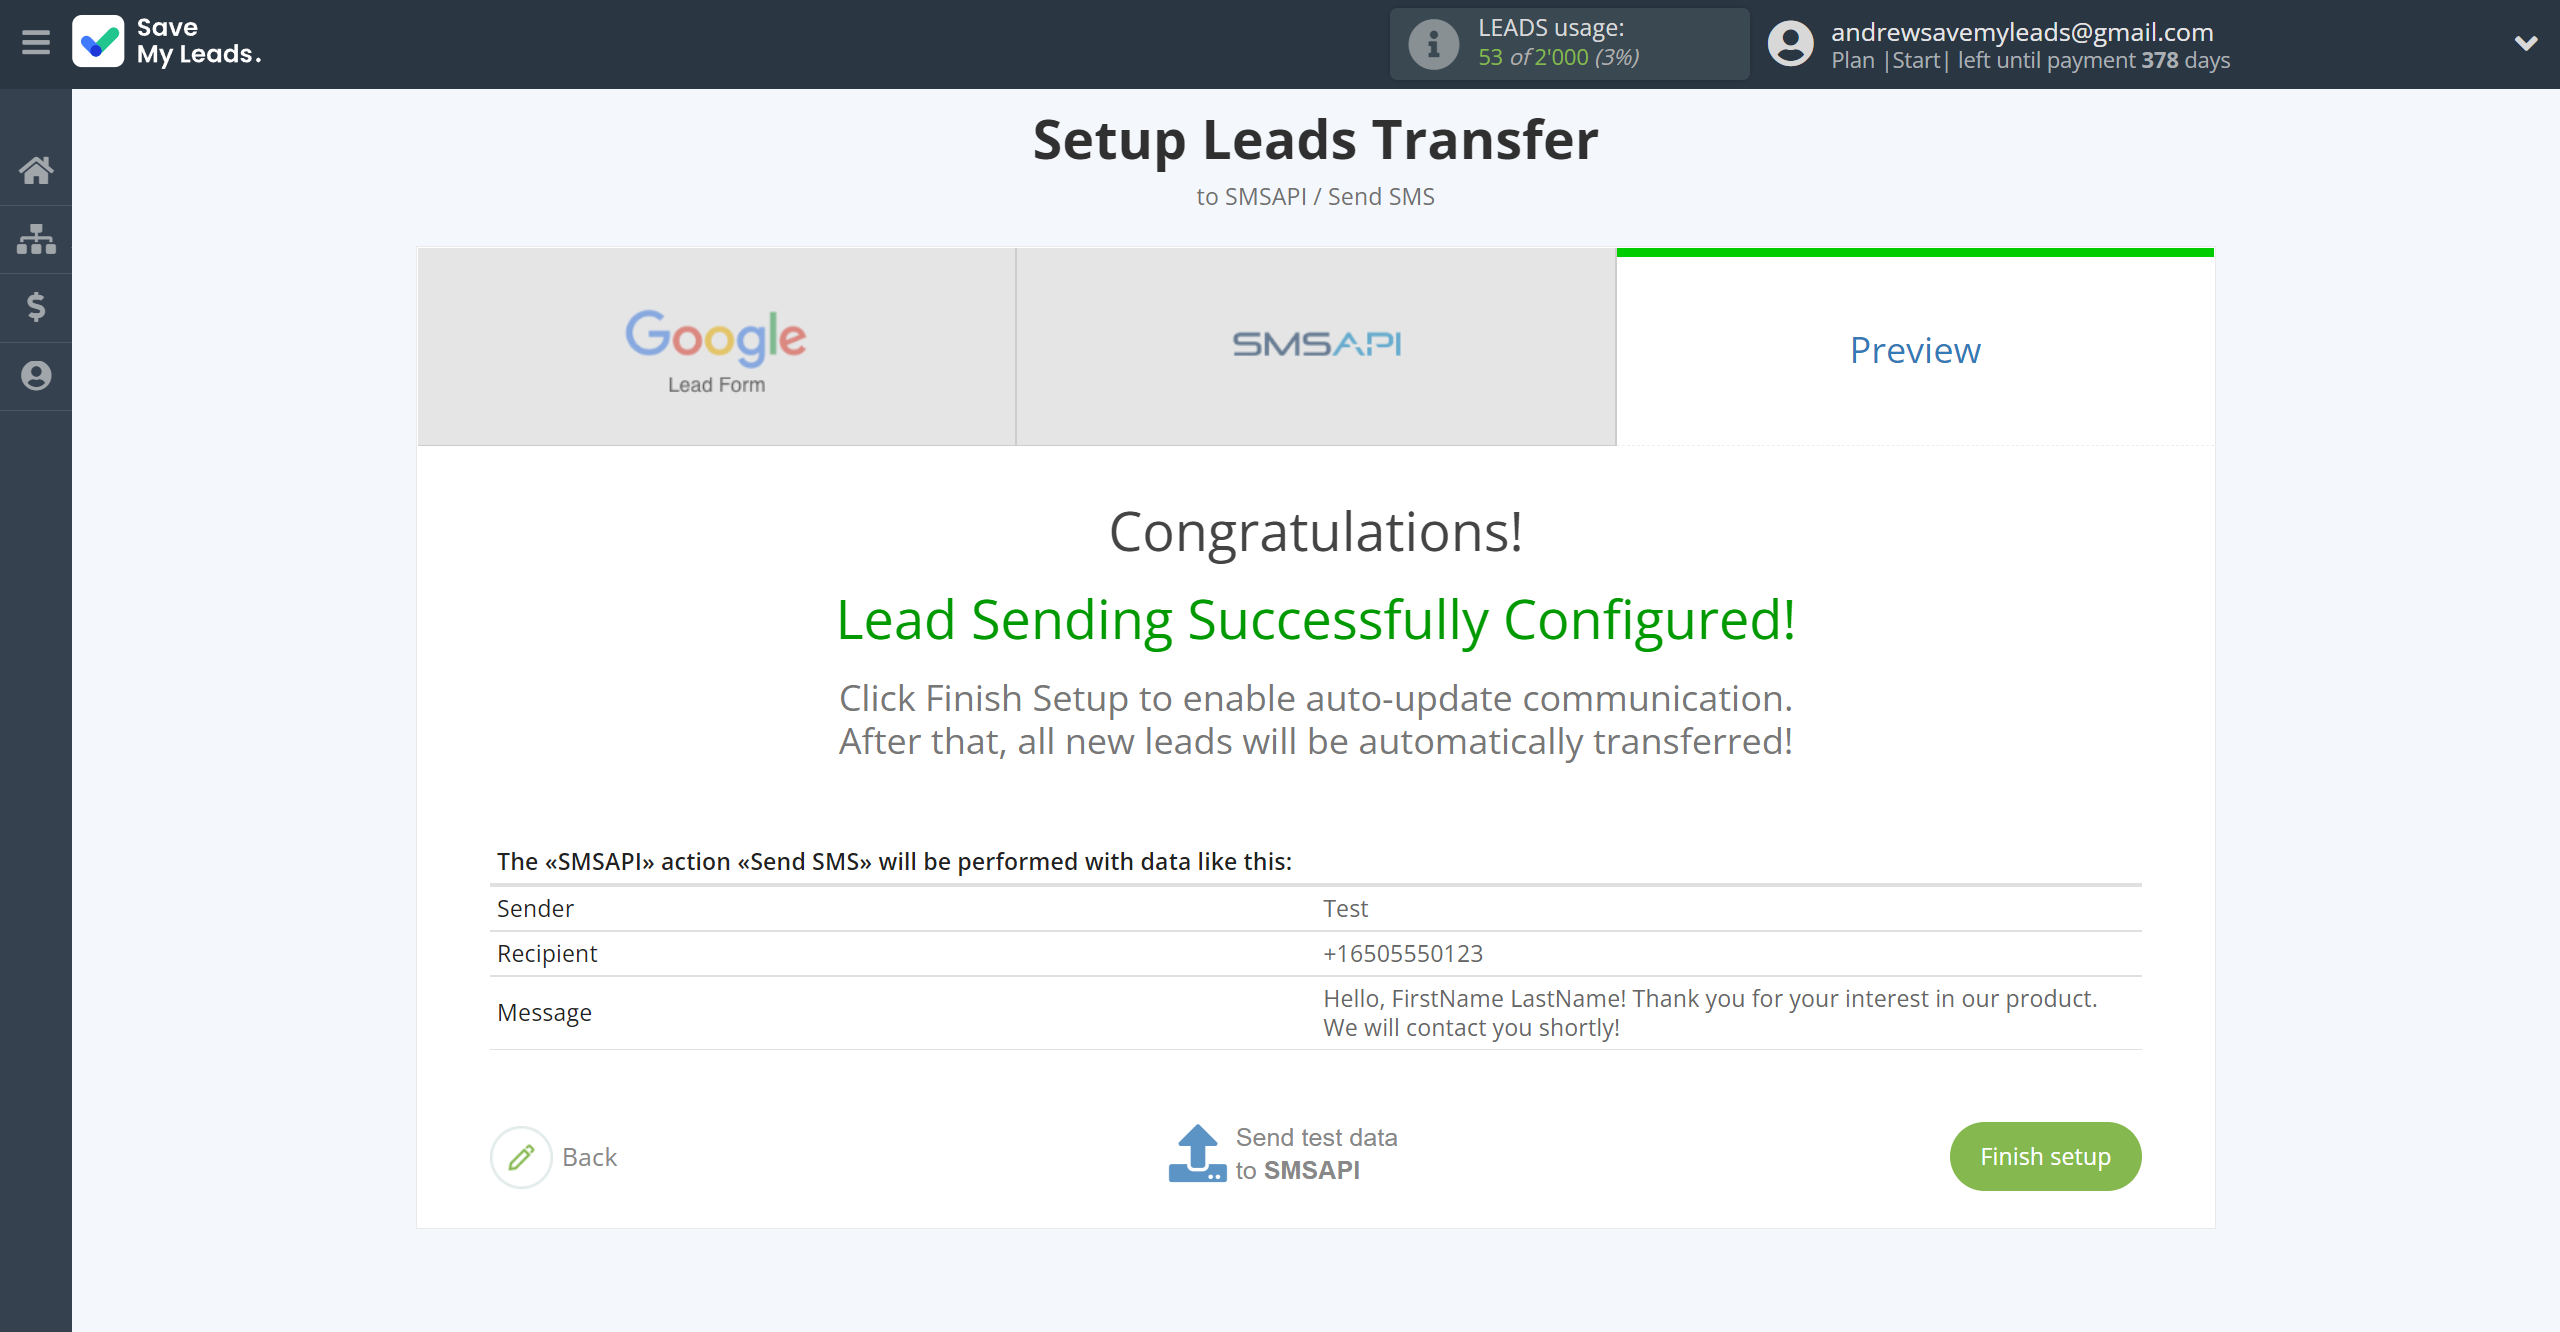 How to Connect Google Lead Form with SMSAPI | Test data